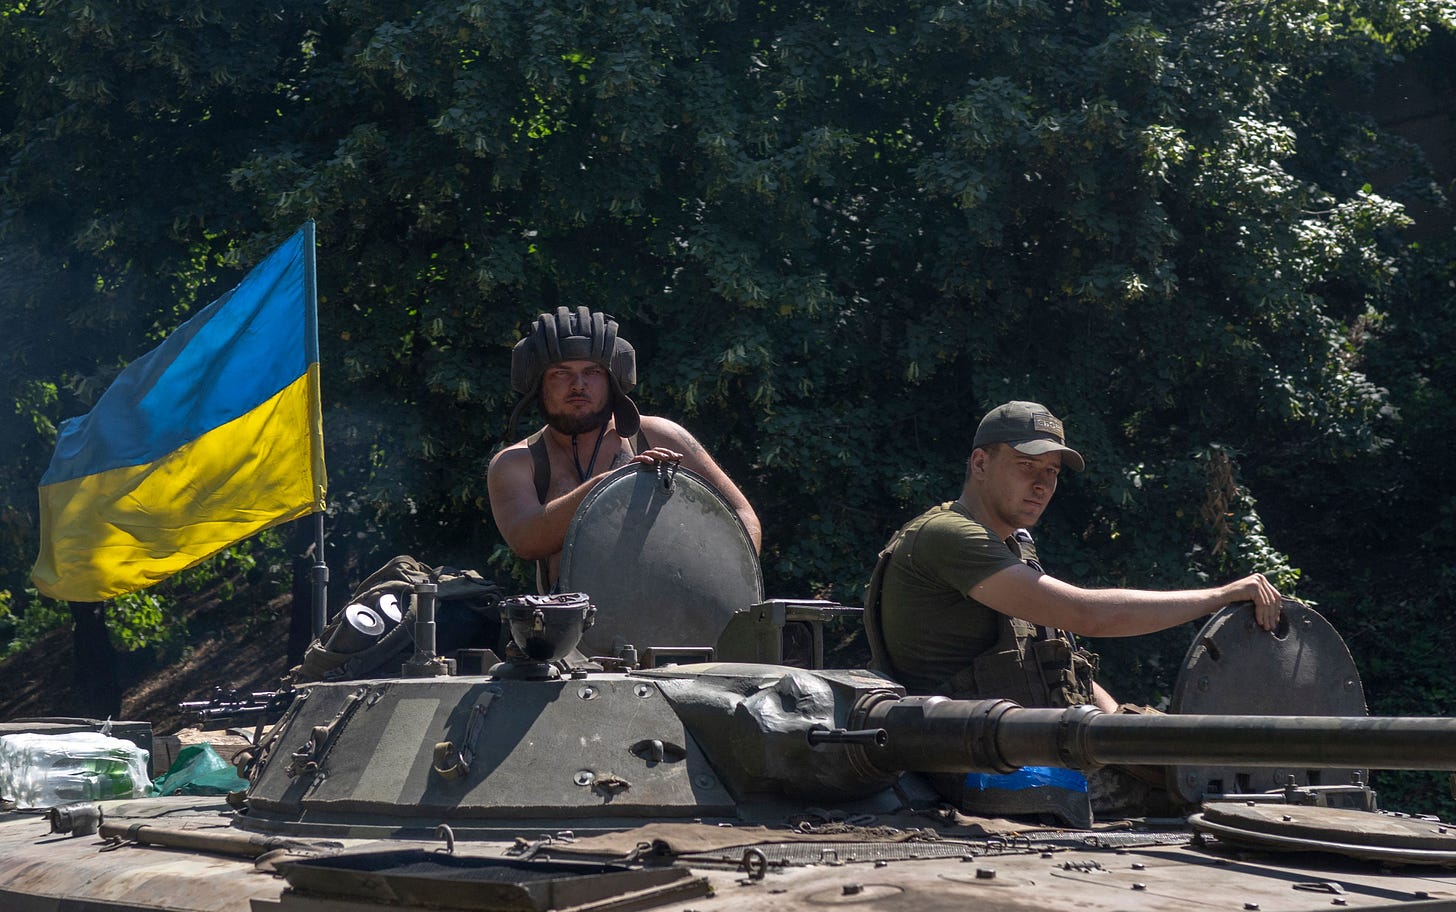 Ukrainian soldiers drive to the front line on July 31, 2022. (Photo by Bulent Kilic via Getty Images).